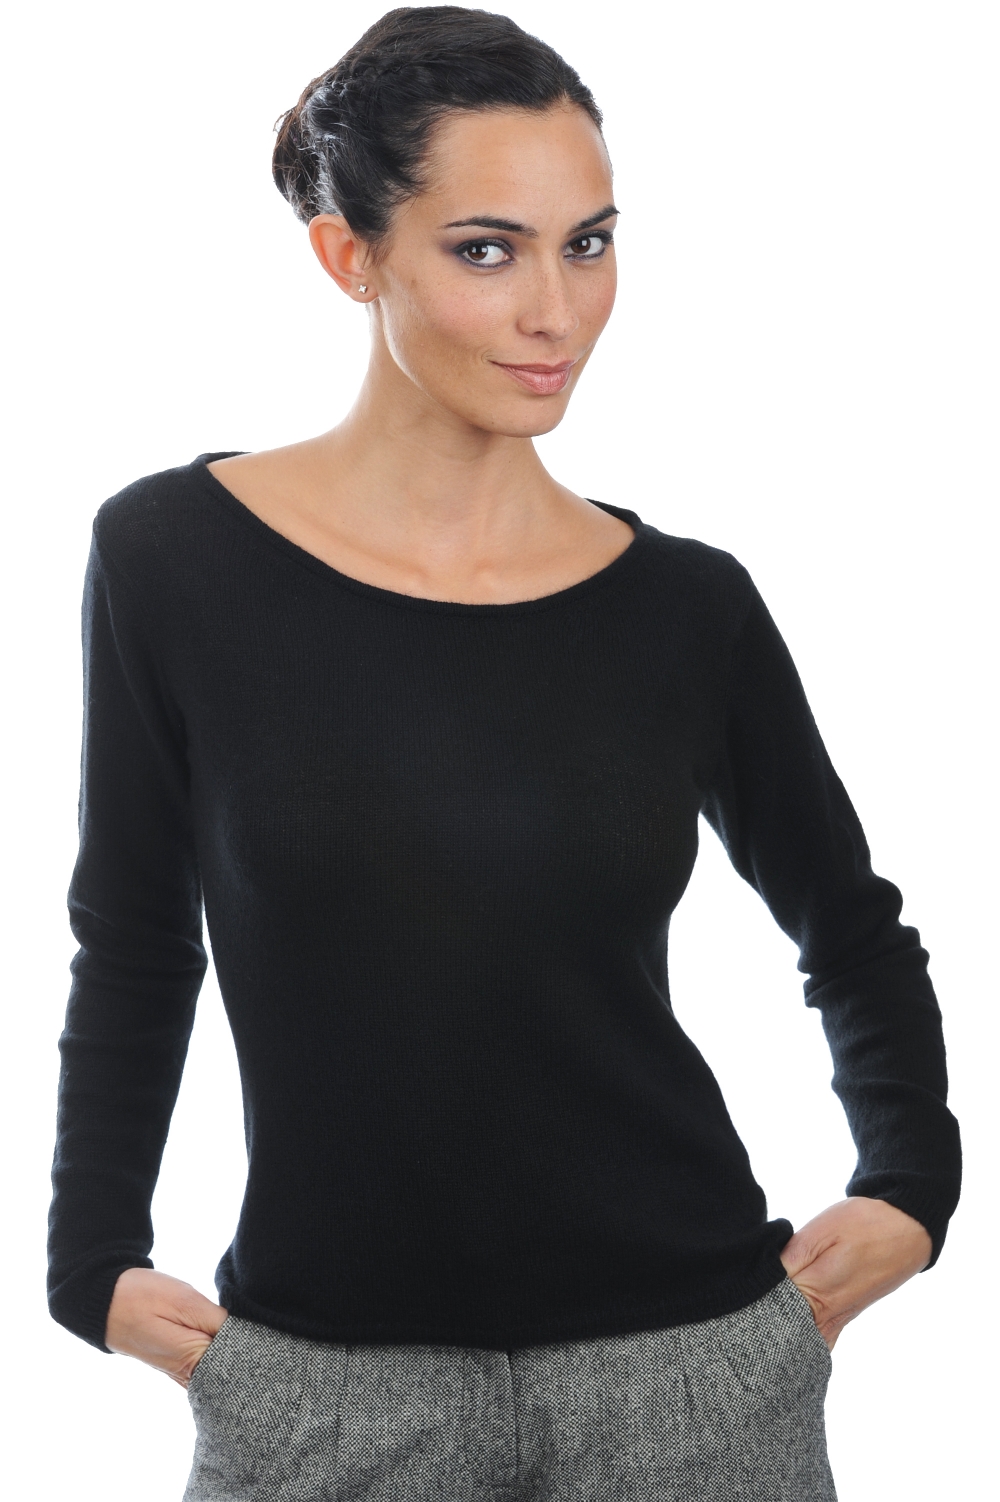 Cashmere ladies basic sweaters at low prices caleen black 3xl